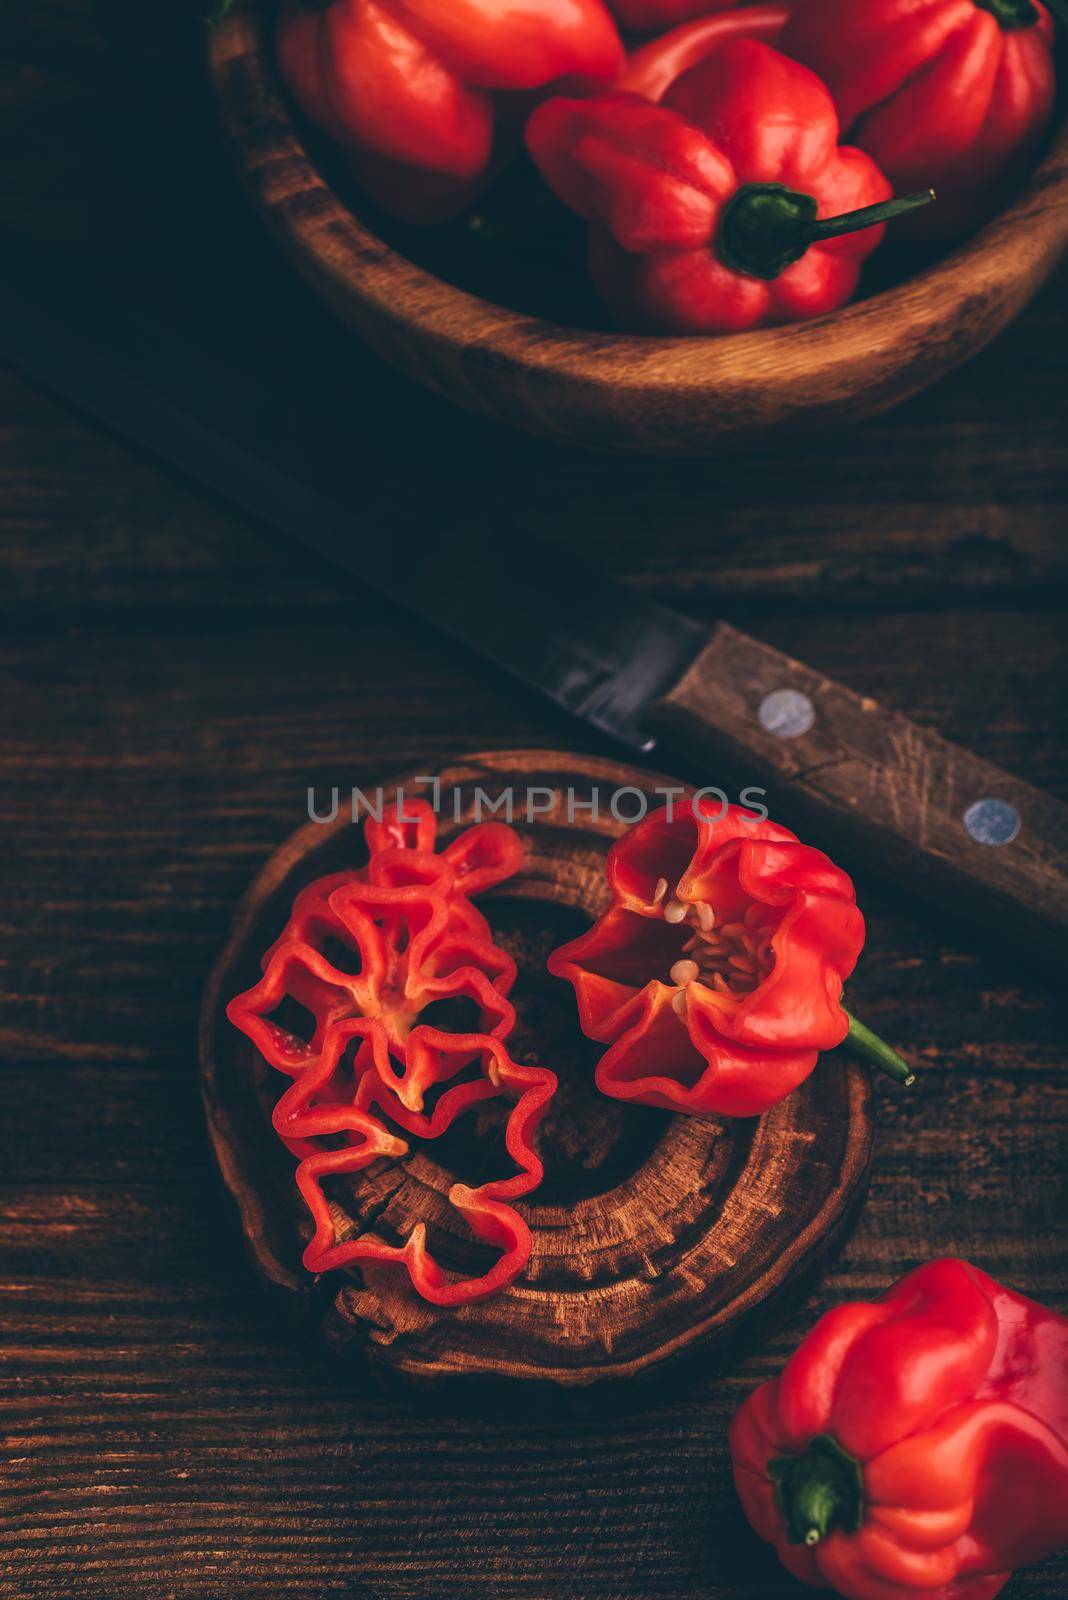 Red Habanero Chili Peppers and One Sliced by Seva_blsv